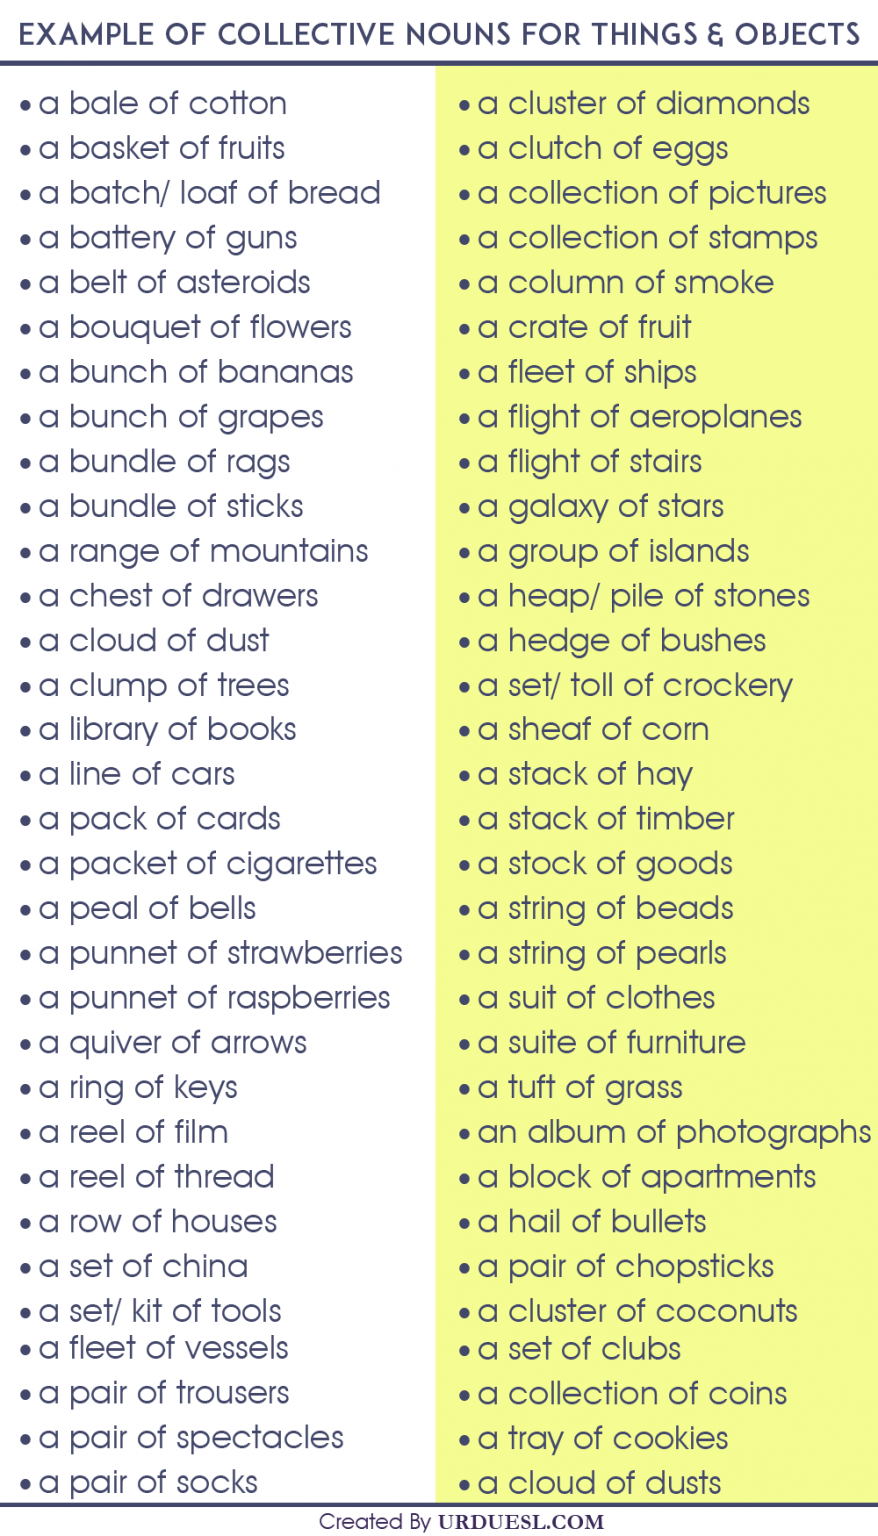 80+ Collective Nouns for Things and Objects